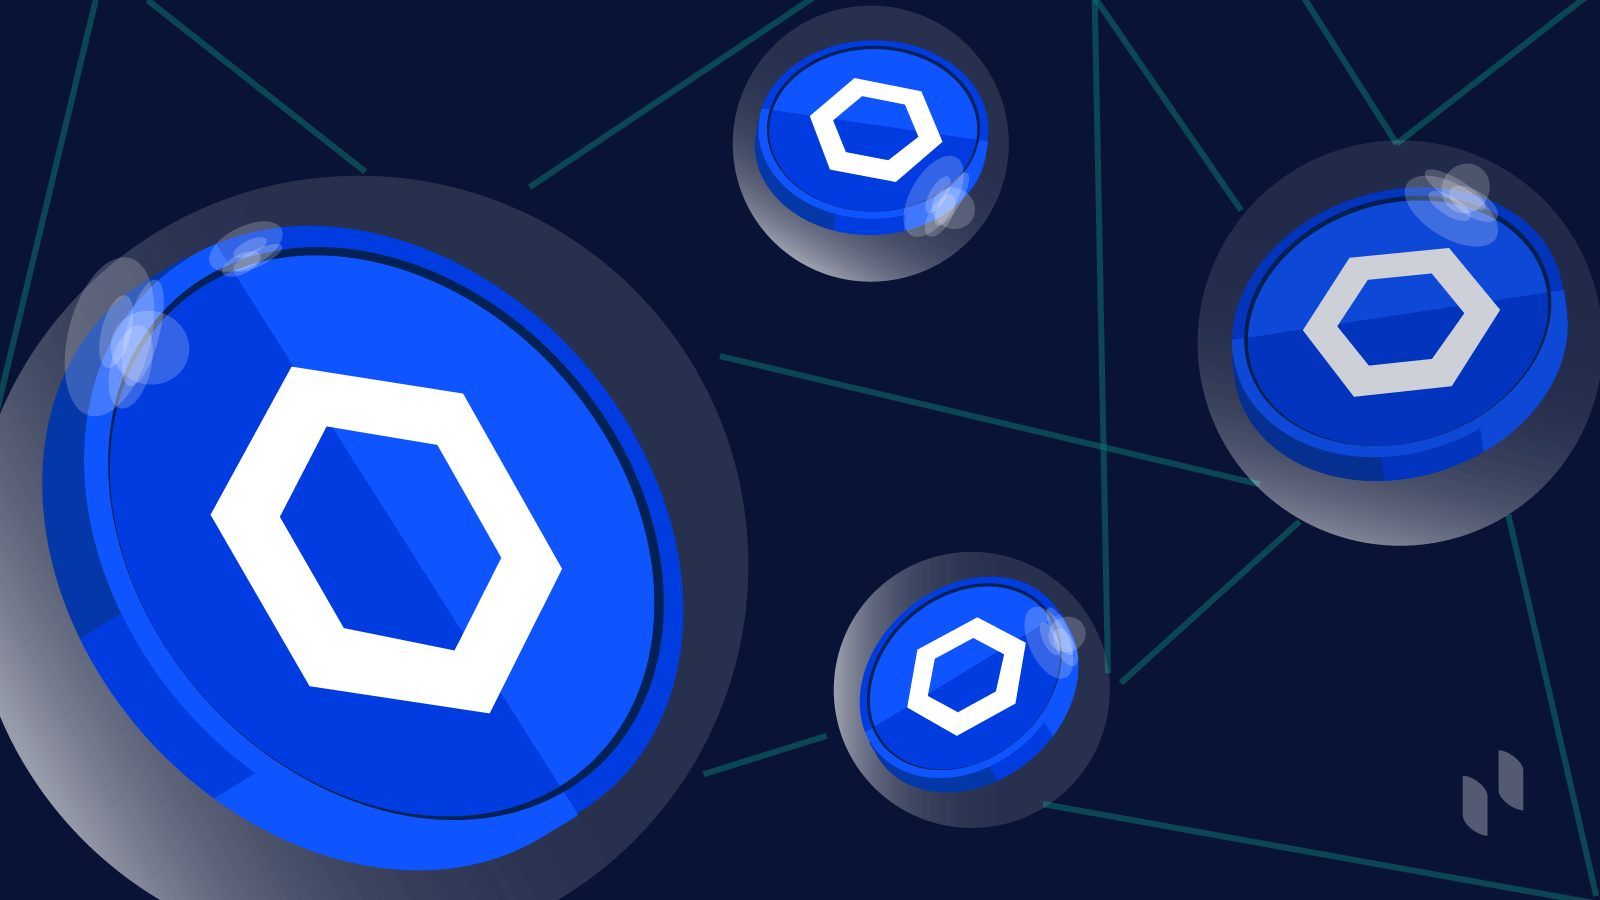 Chainlink (LINK) Launches New Bridging Tool Transporter